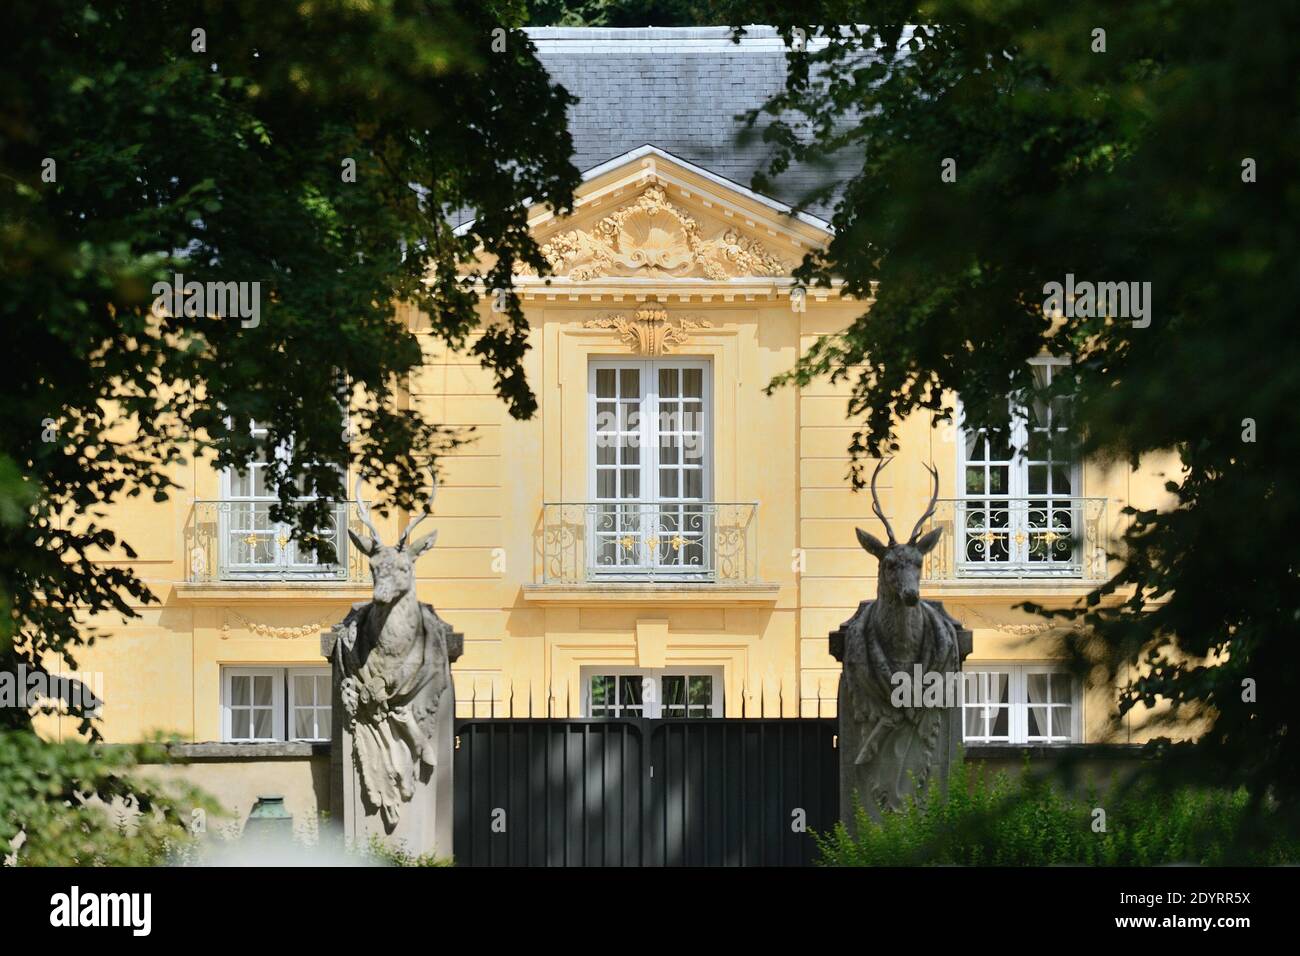 View of the Pavillon de la Lanterne in Versailles, France on August 13,  2013. French president Francois Hollande will spend his summer holidays in  this former hunting pavilion near Versailles castle just